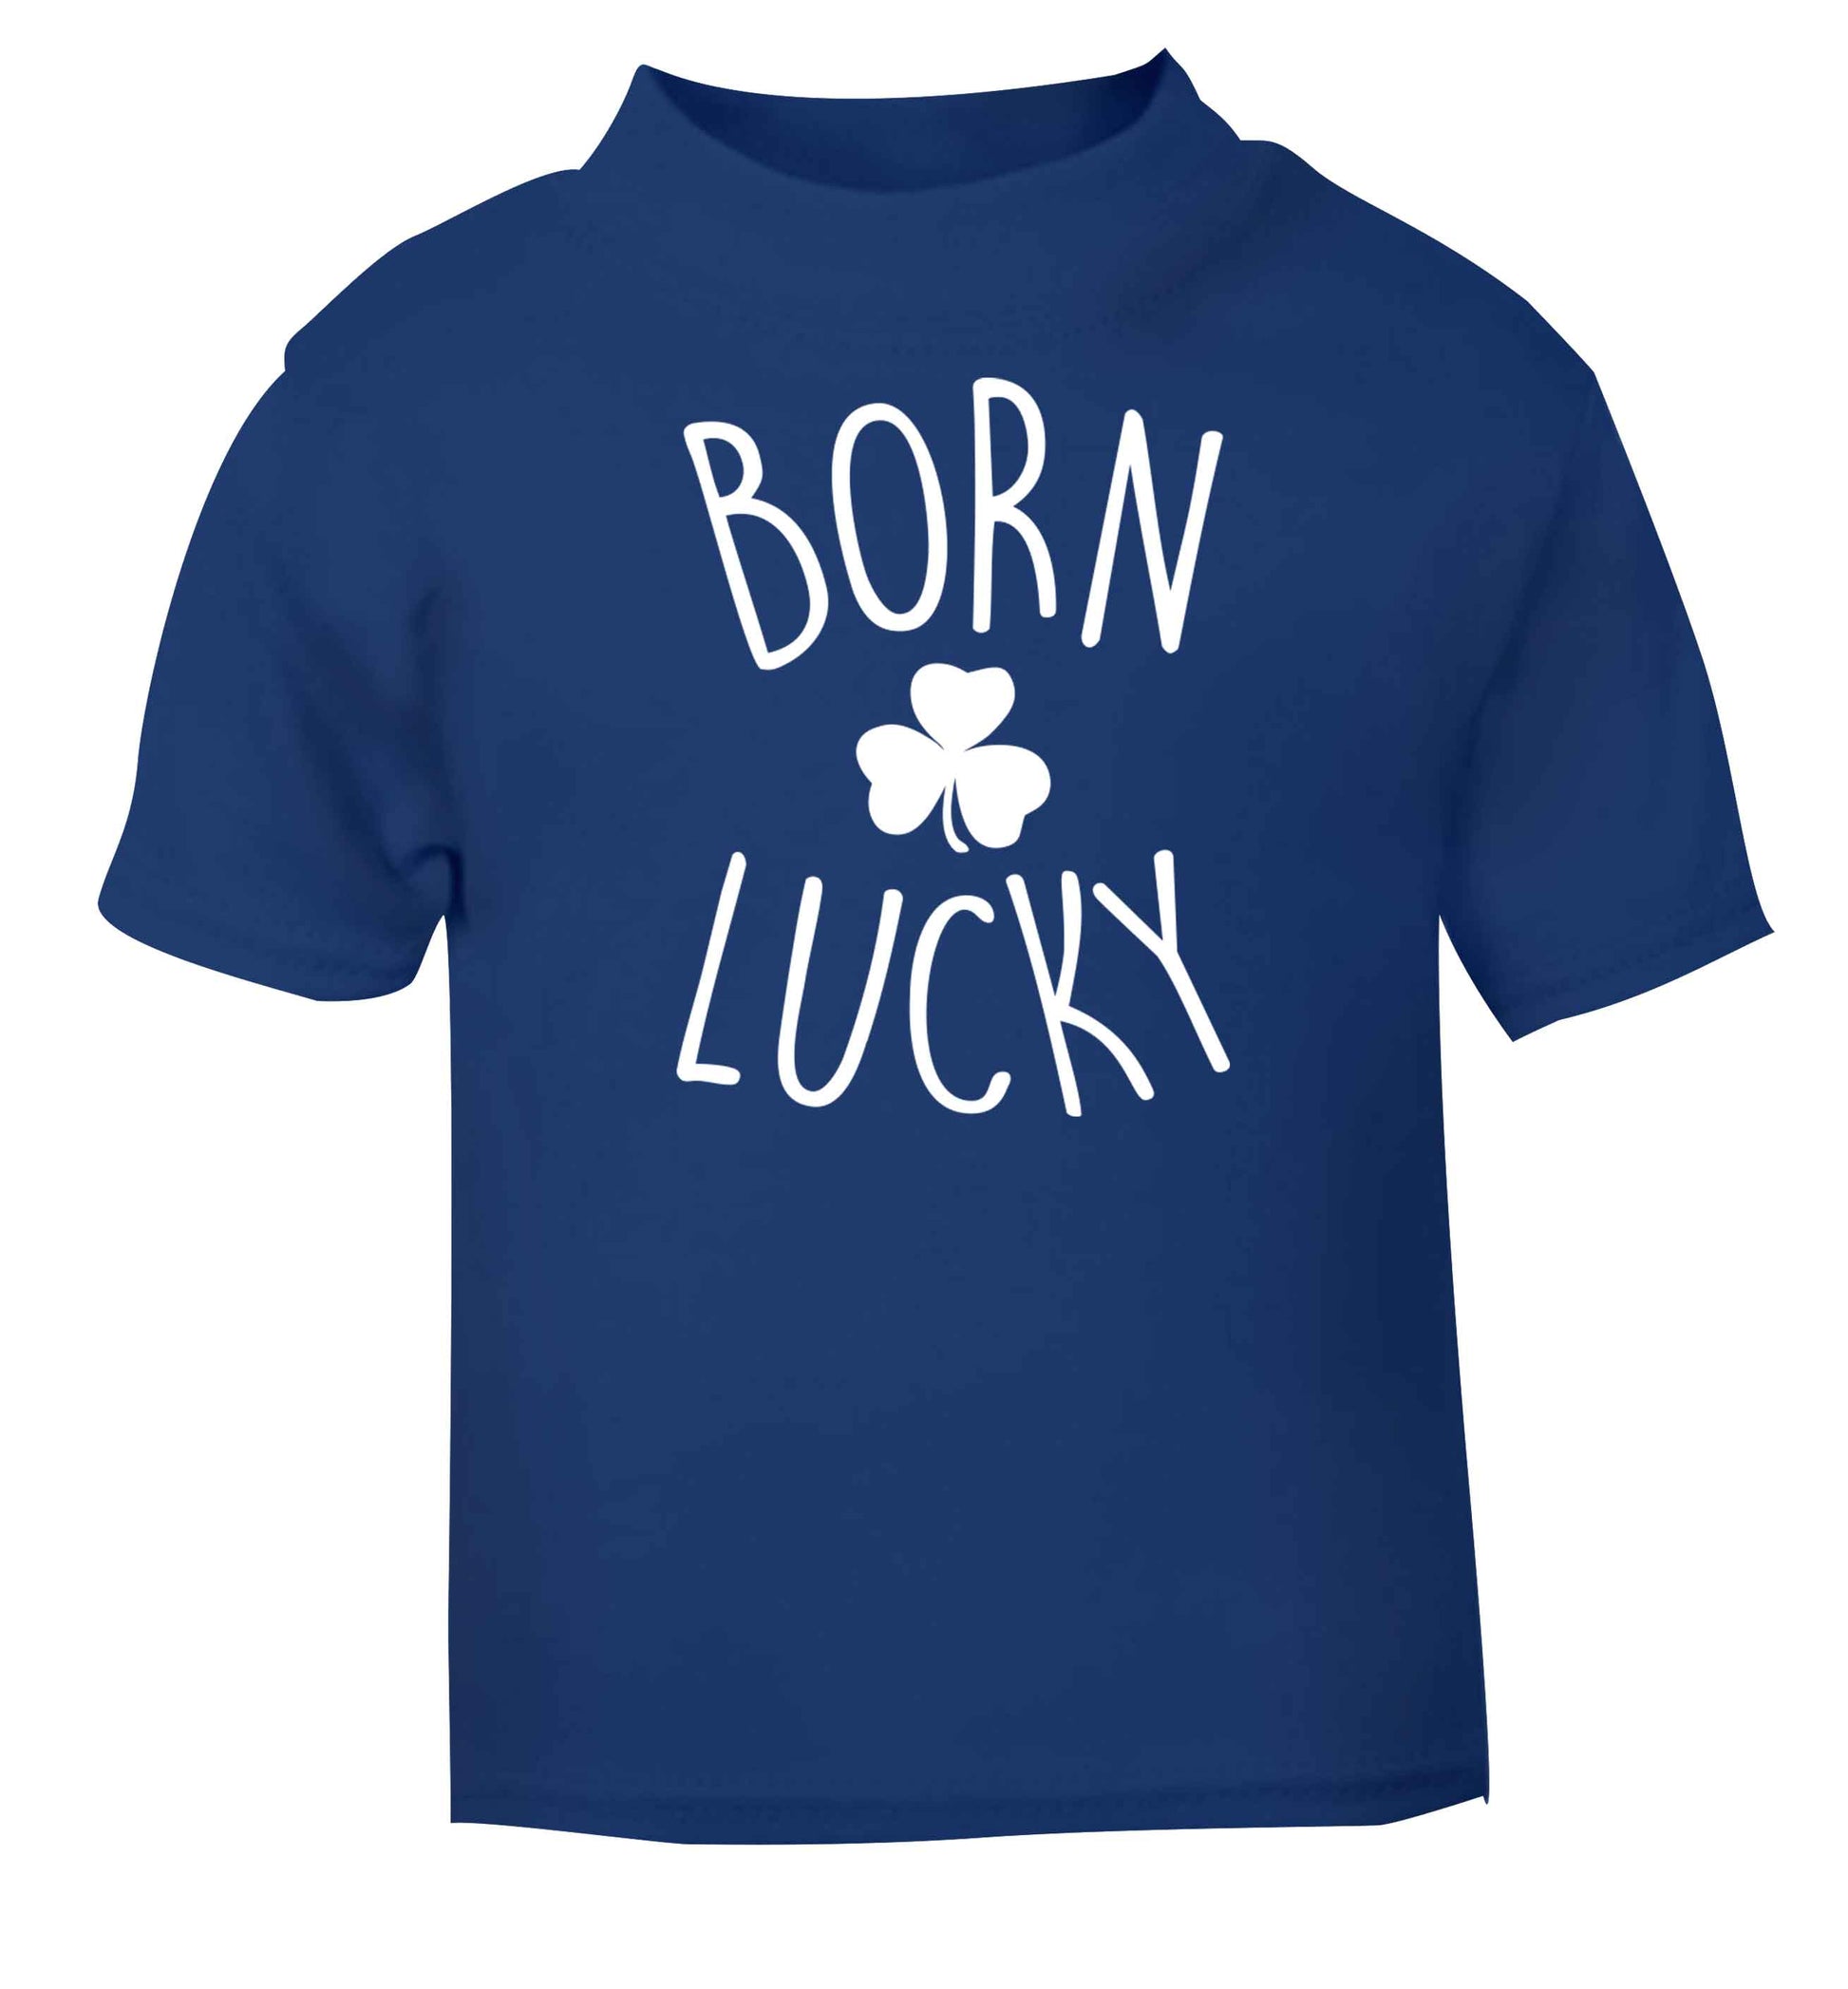 Born Lucky blue baby toddler Tshirt 2 Years